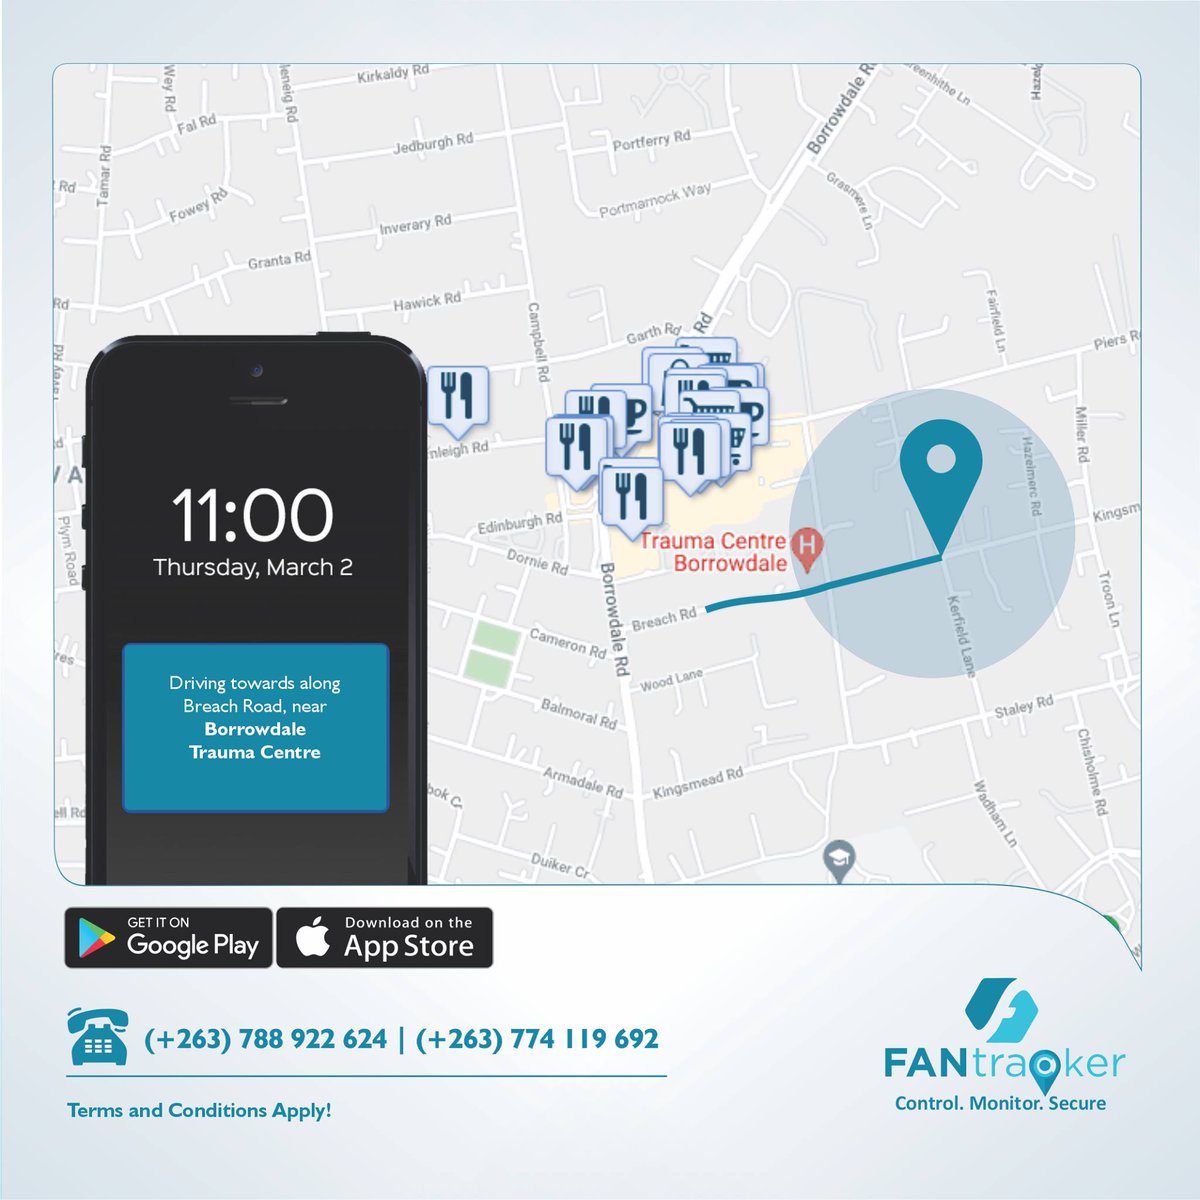 FANtracker has you connected to your fleet 24/7 from anywhere across Africa. Sign up for the FANtracker Advanced Fuel Monitoring Solution and stay updated!

#FANtracker #Fuelmonitoring #Smartsolutions #Vehicletracking #Fleetmanagement